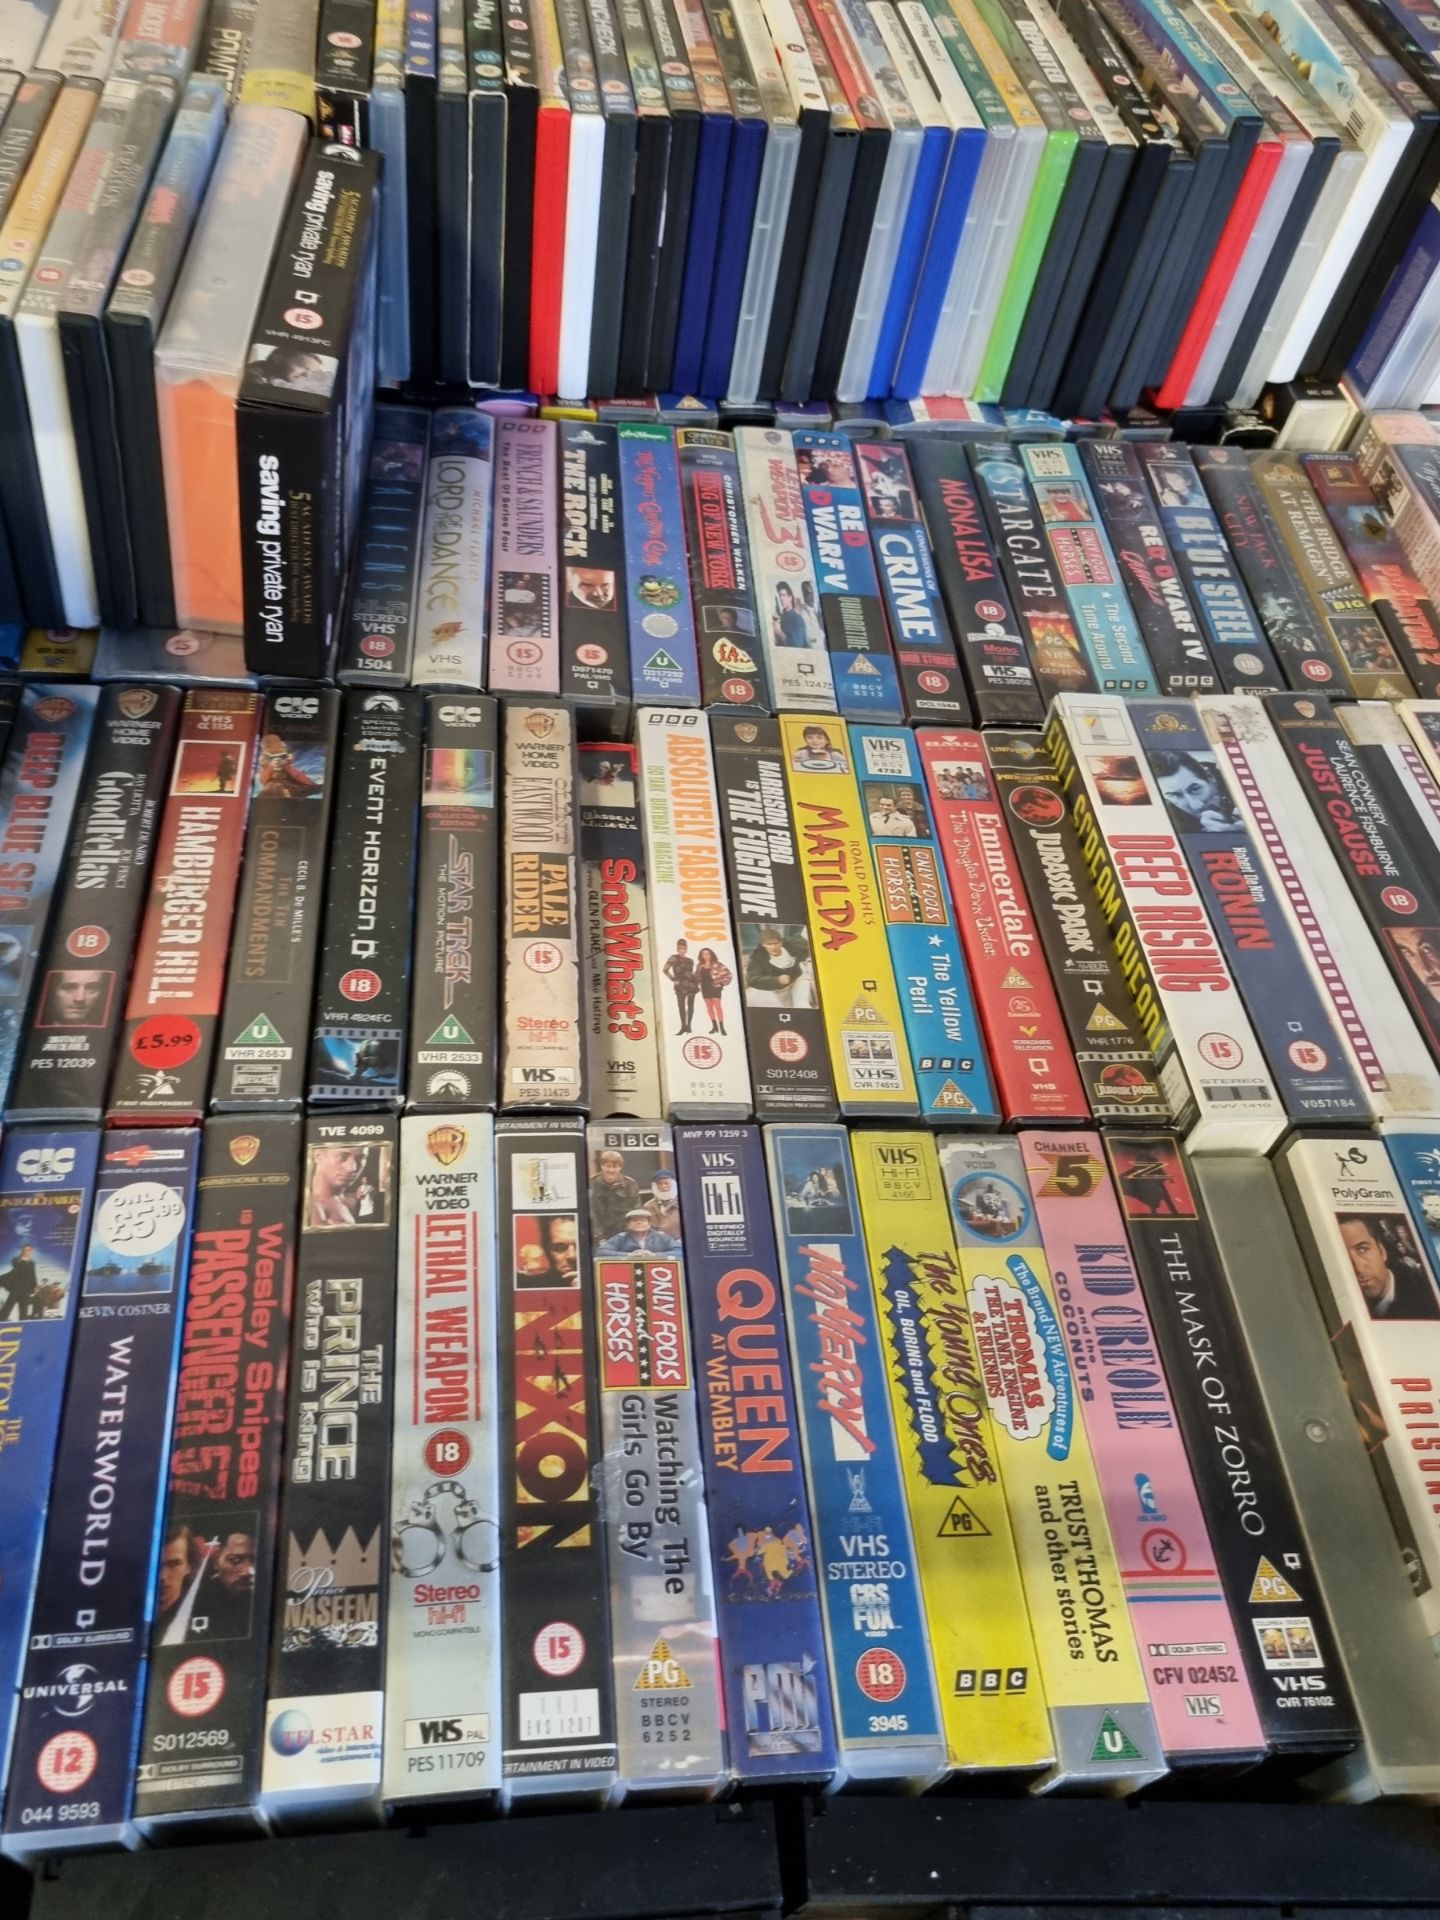 Various DVDs and VHS tapes - film and TV series - mixed genres - Image 3 of 7